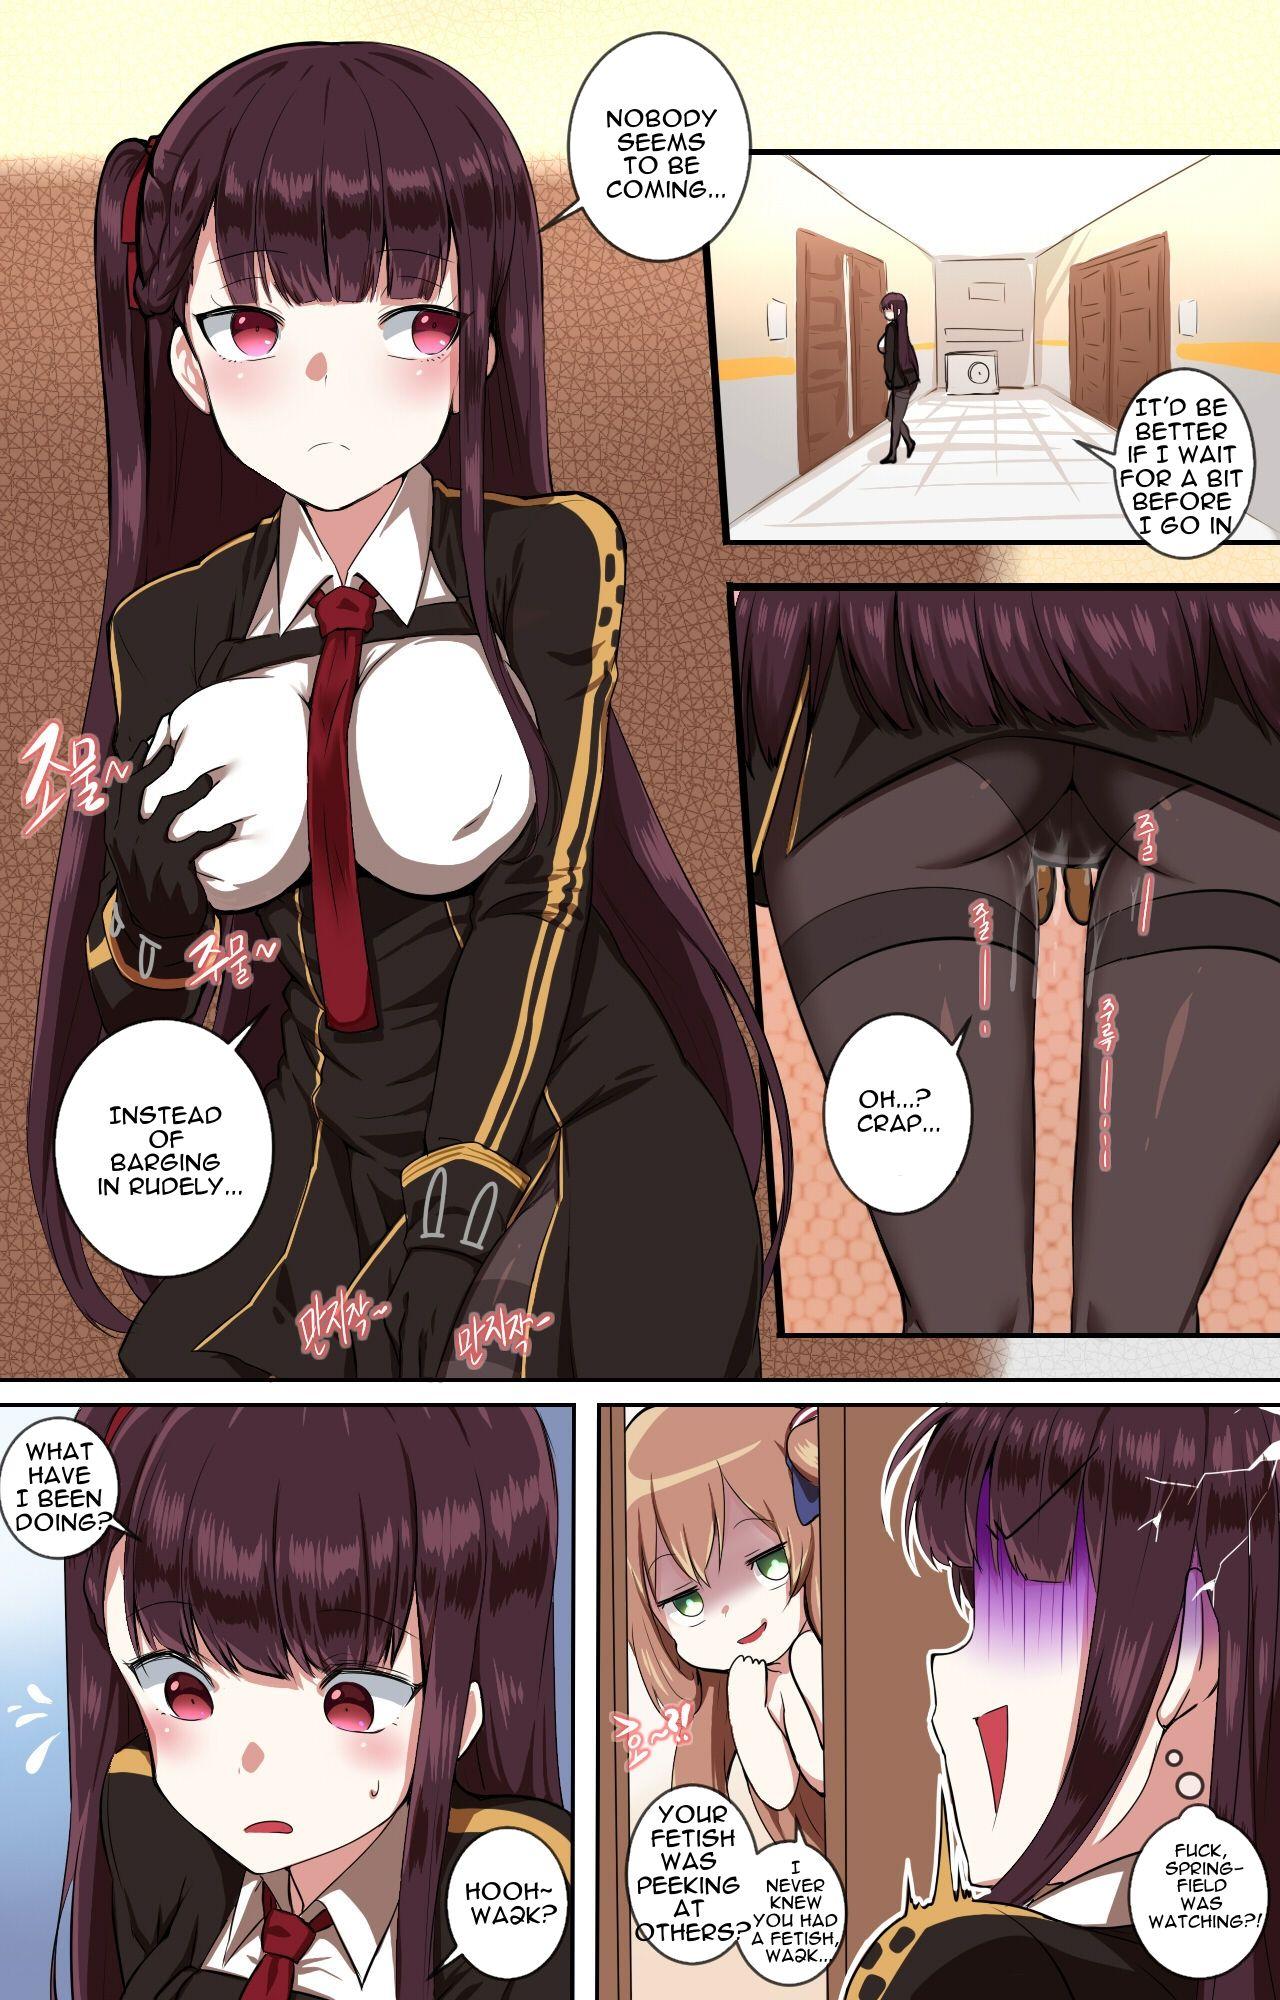 Reversecowgirl How to use dolls 02 - Girls frontline Hair - Page 4